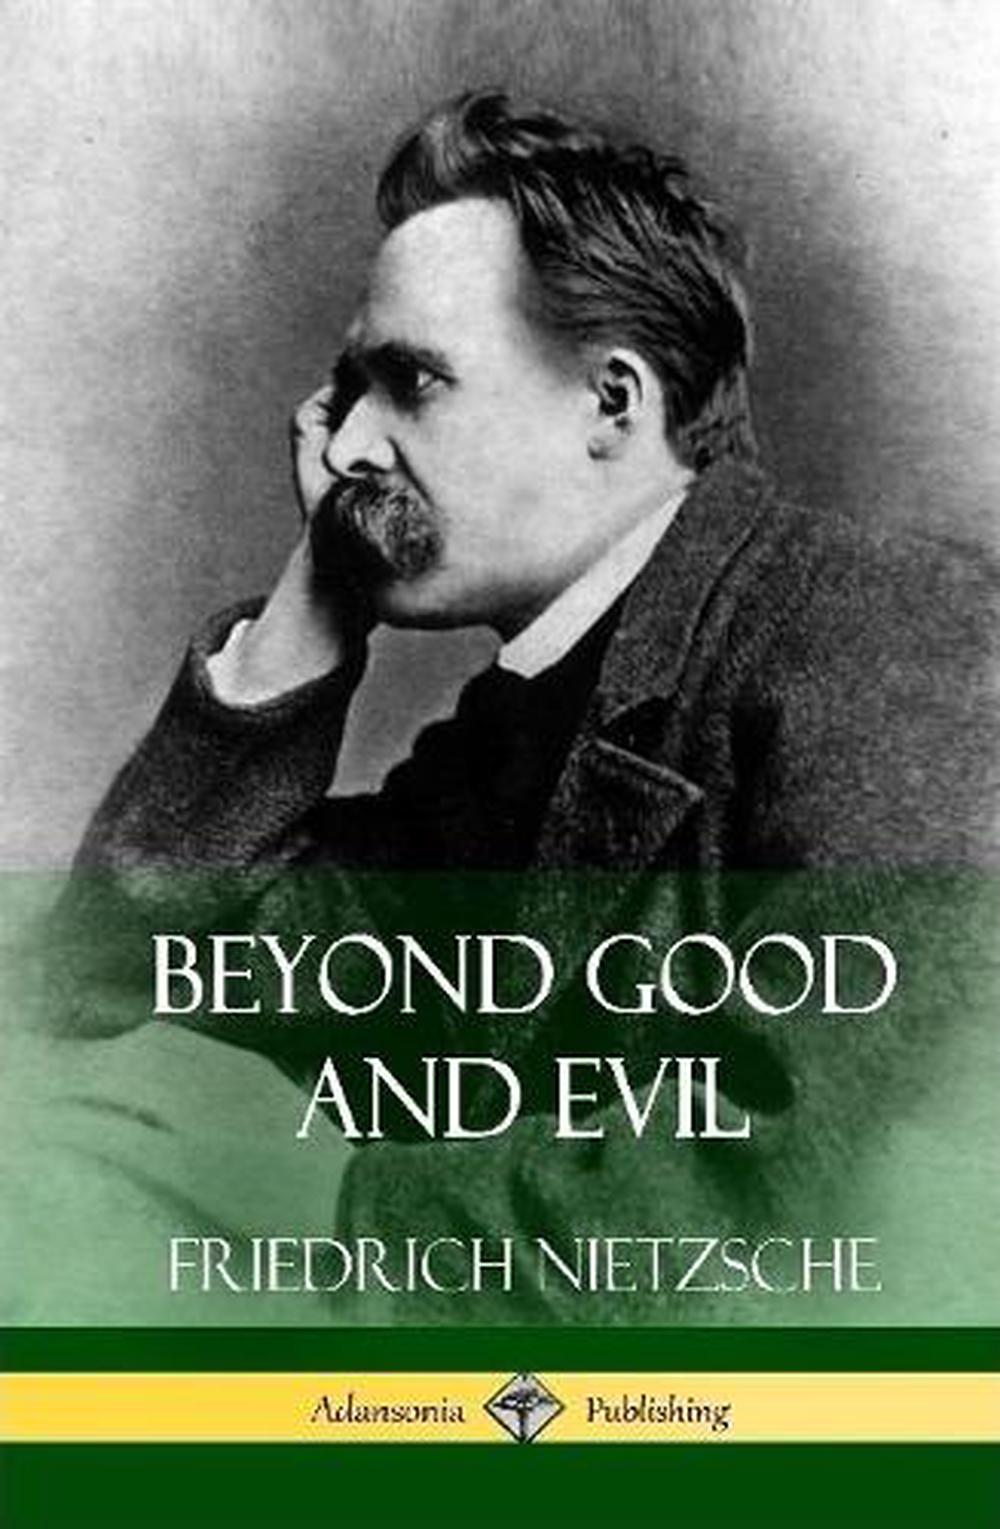 beyond good and evil book review